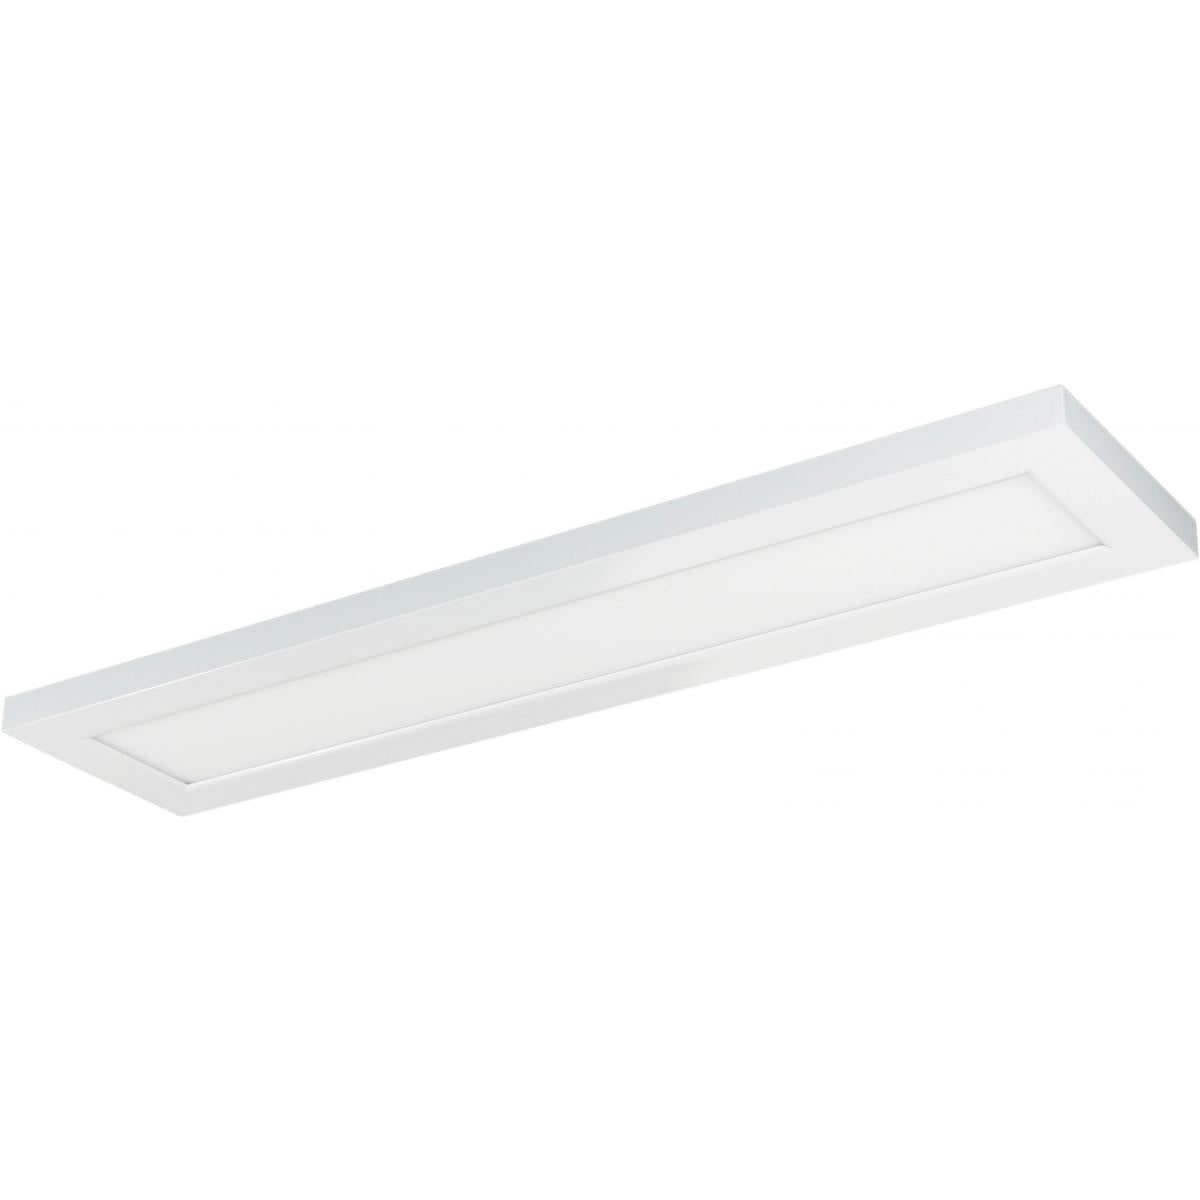 SATCO-62-1155SATCO 62-1155 22W LED 5 IN X 2FT Surface Mount FLUSH/5K/WH